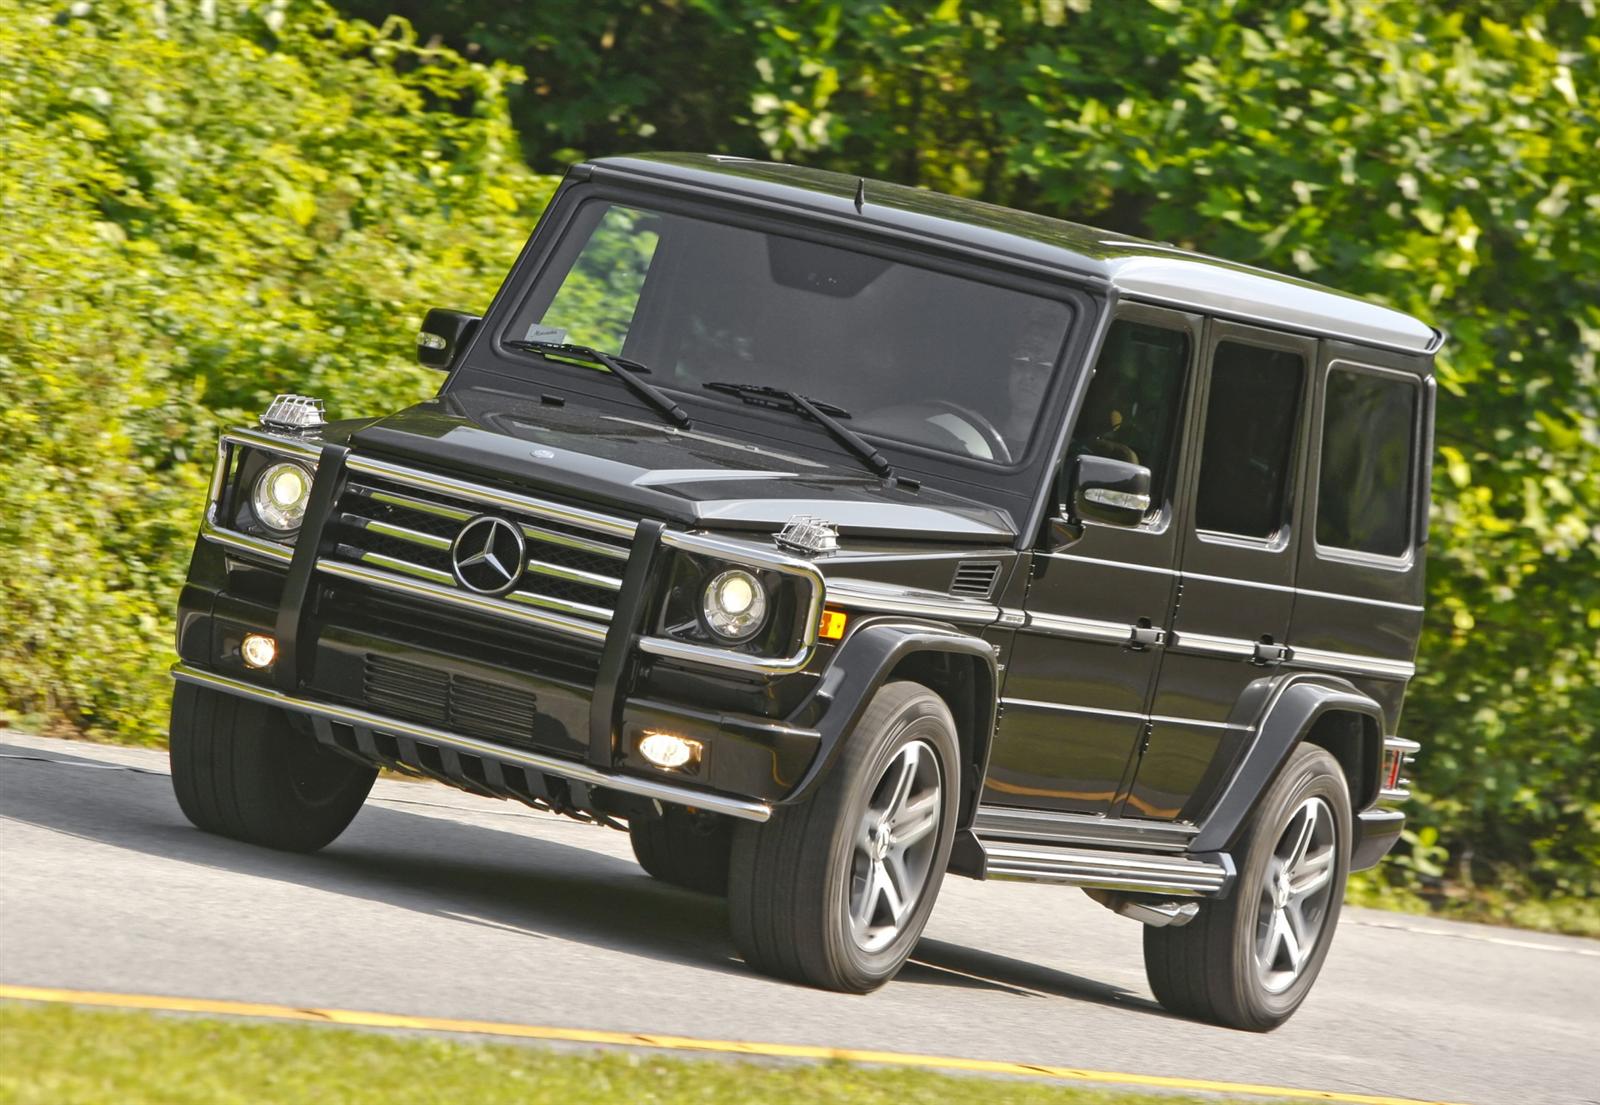 2010 Mercedes-Benz G Class Image. Photo 36 of 59